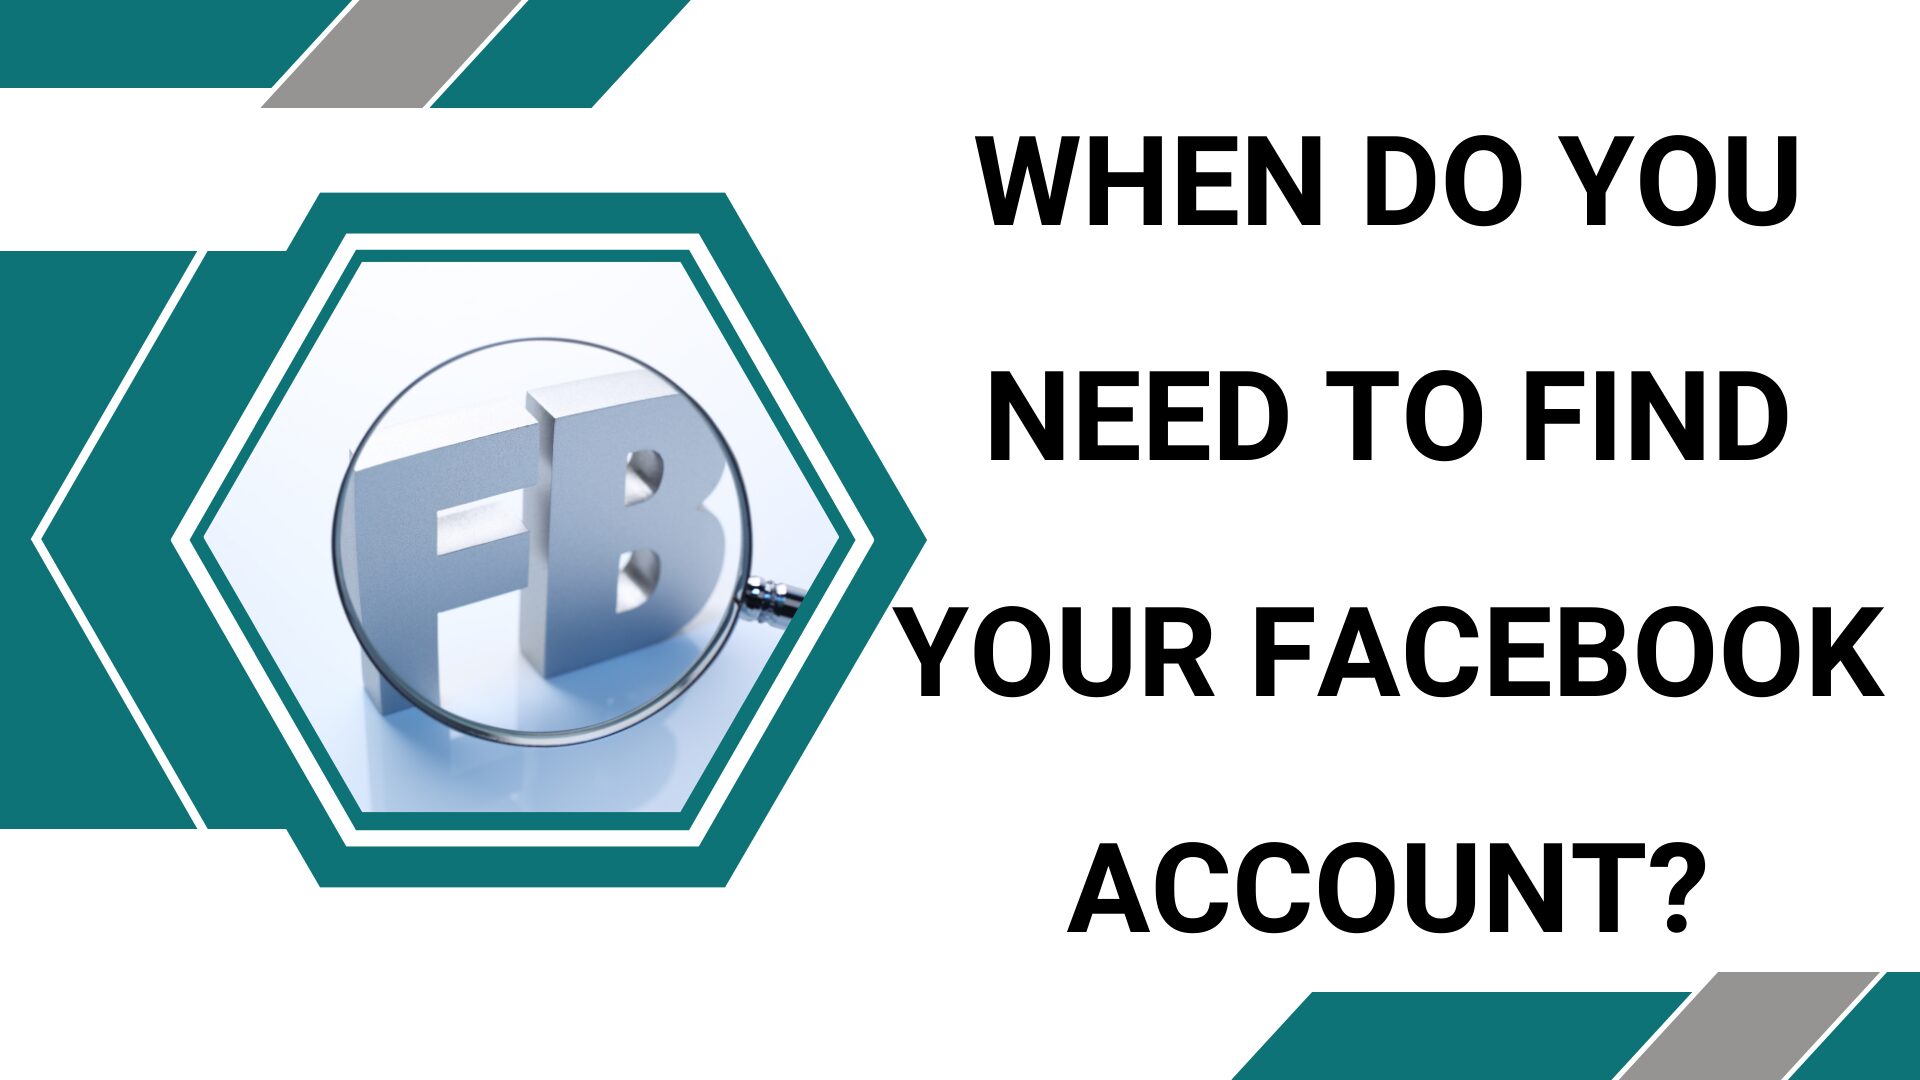 When do you need to find your Facebook account?